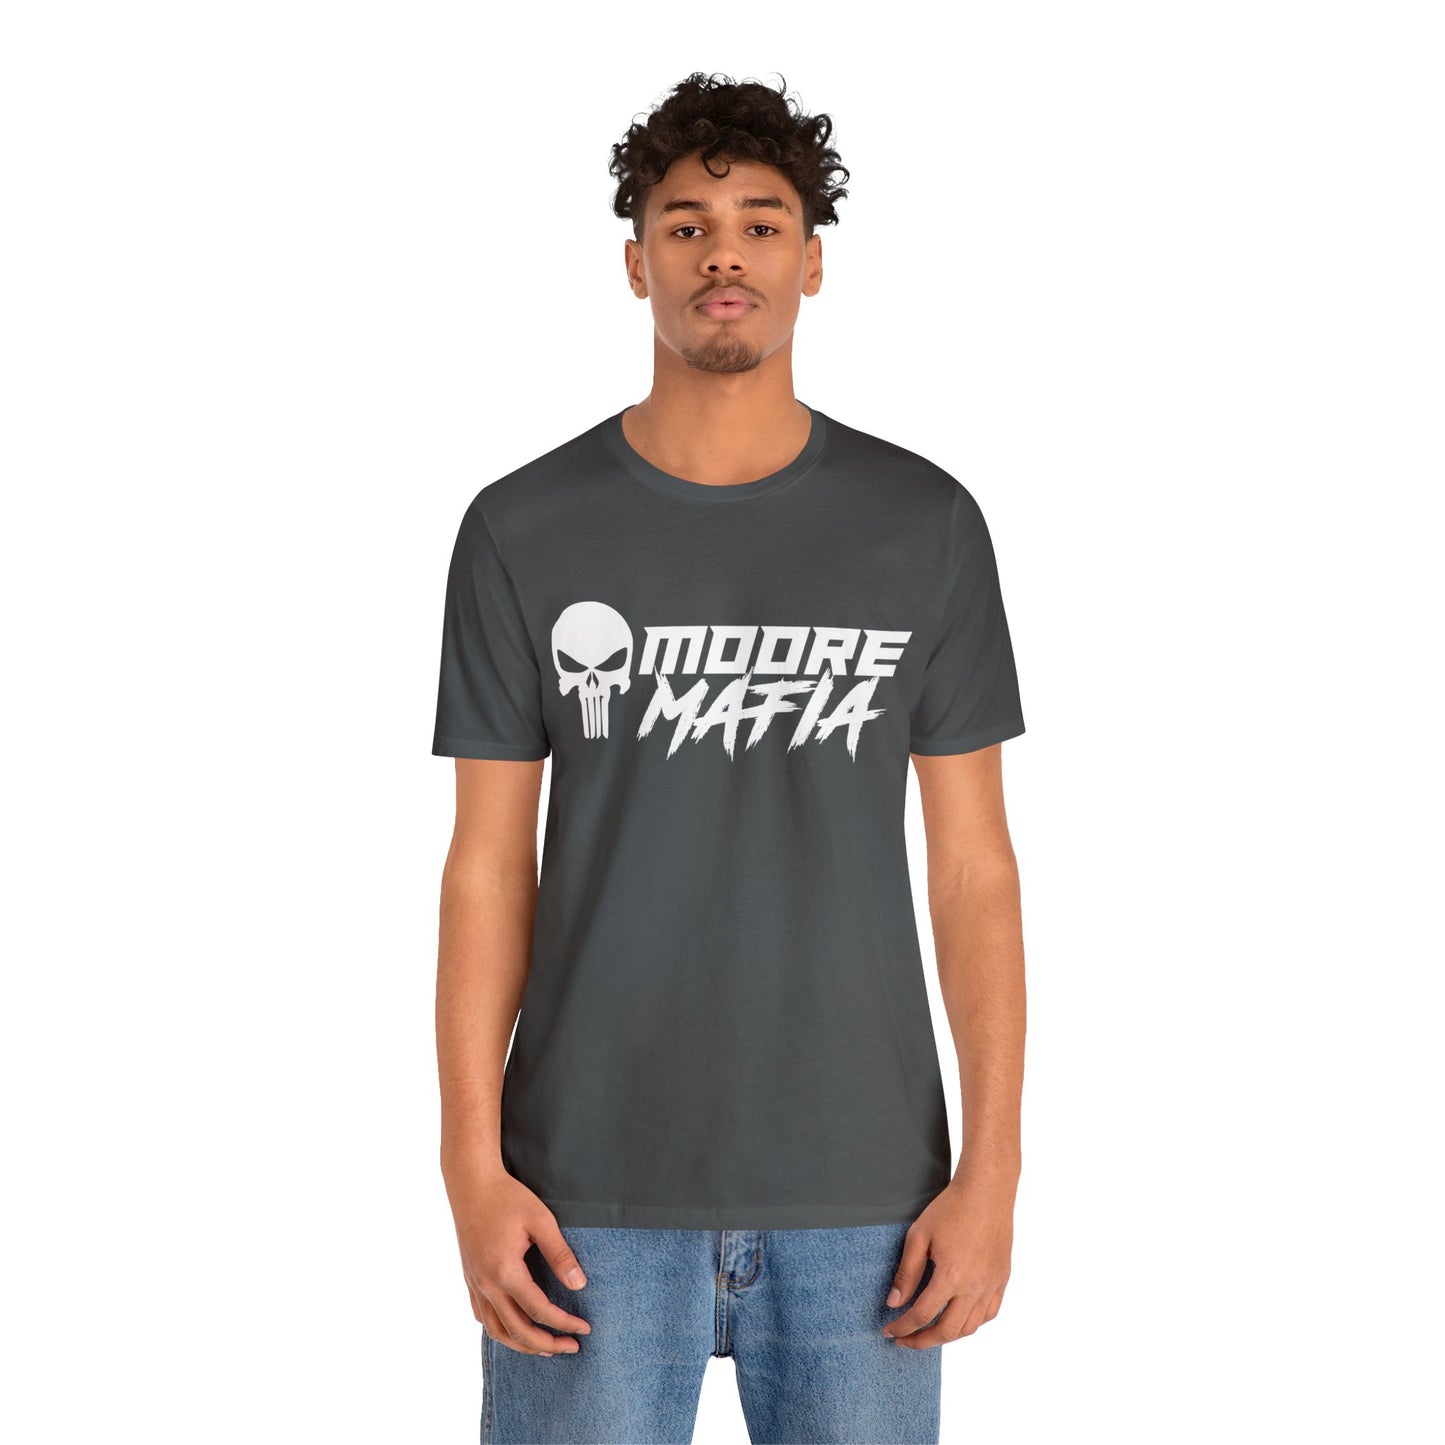 My Other Ride Is Your Face Unisex T-Shirt